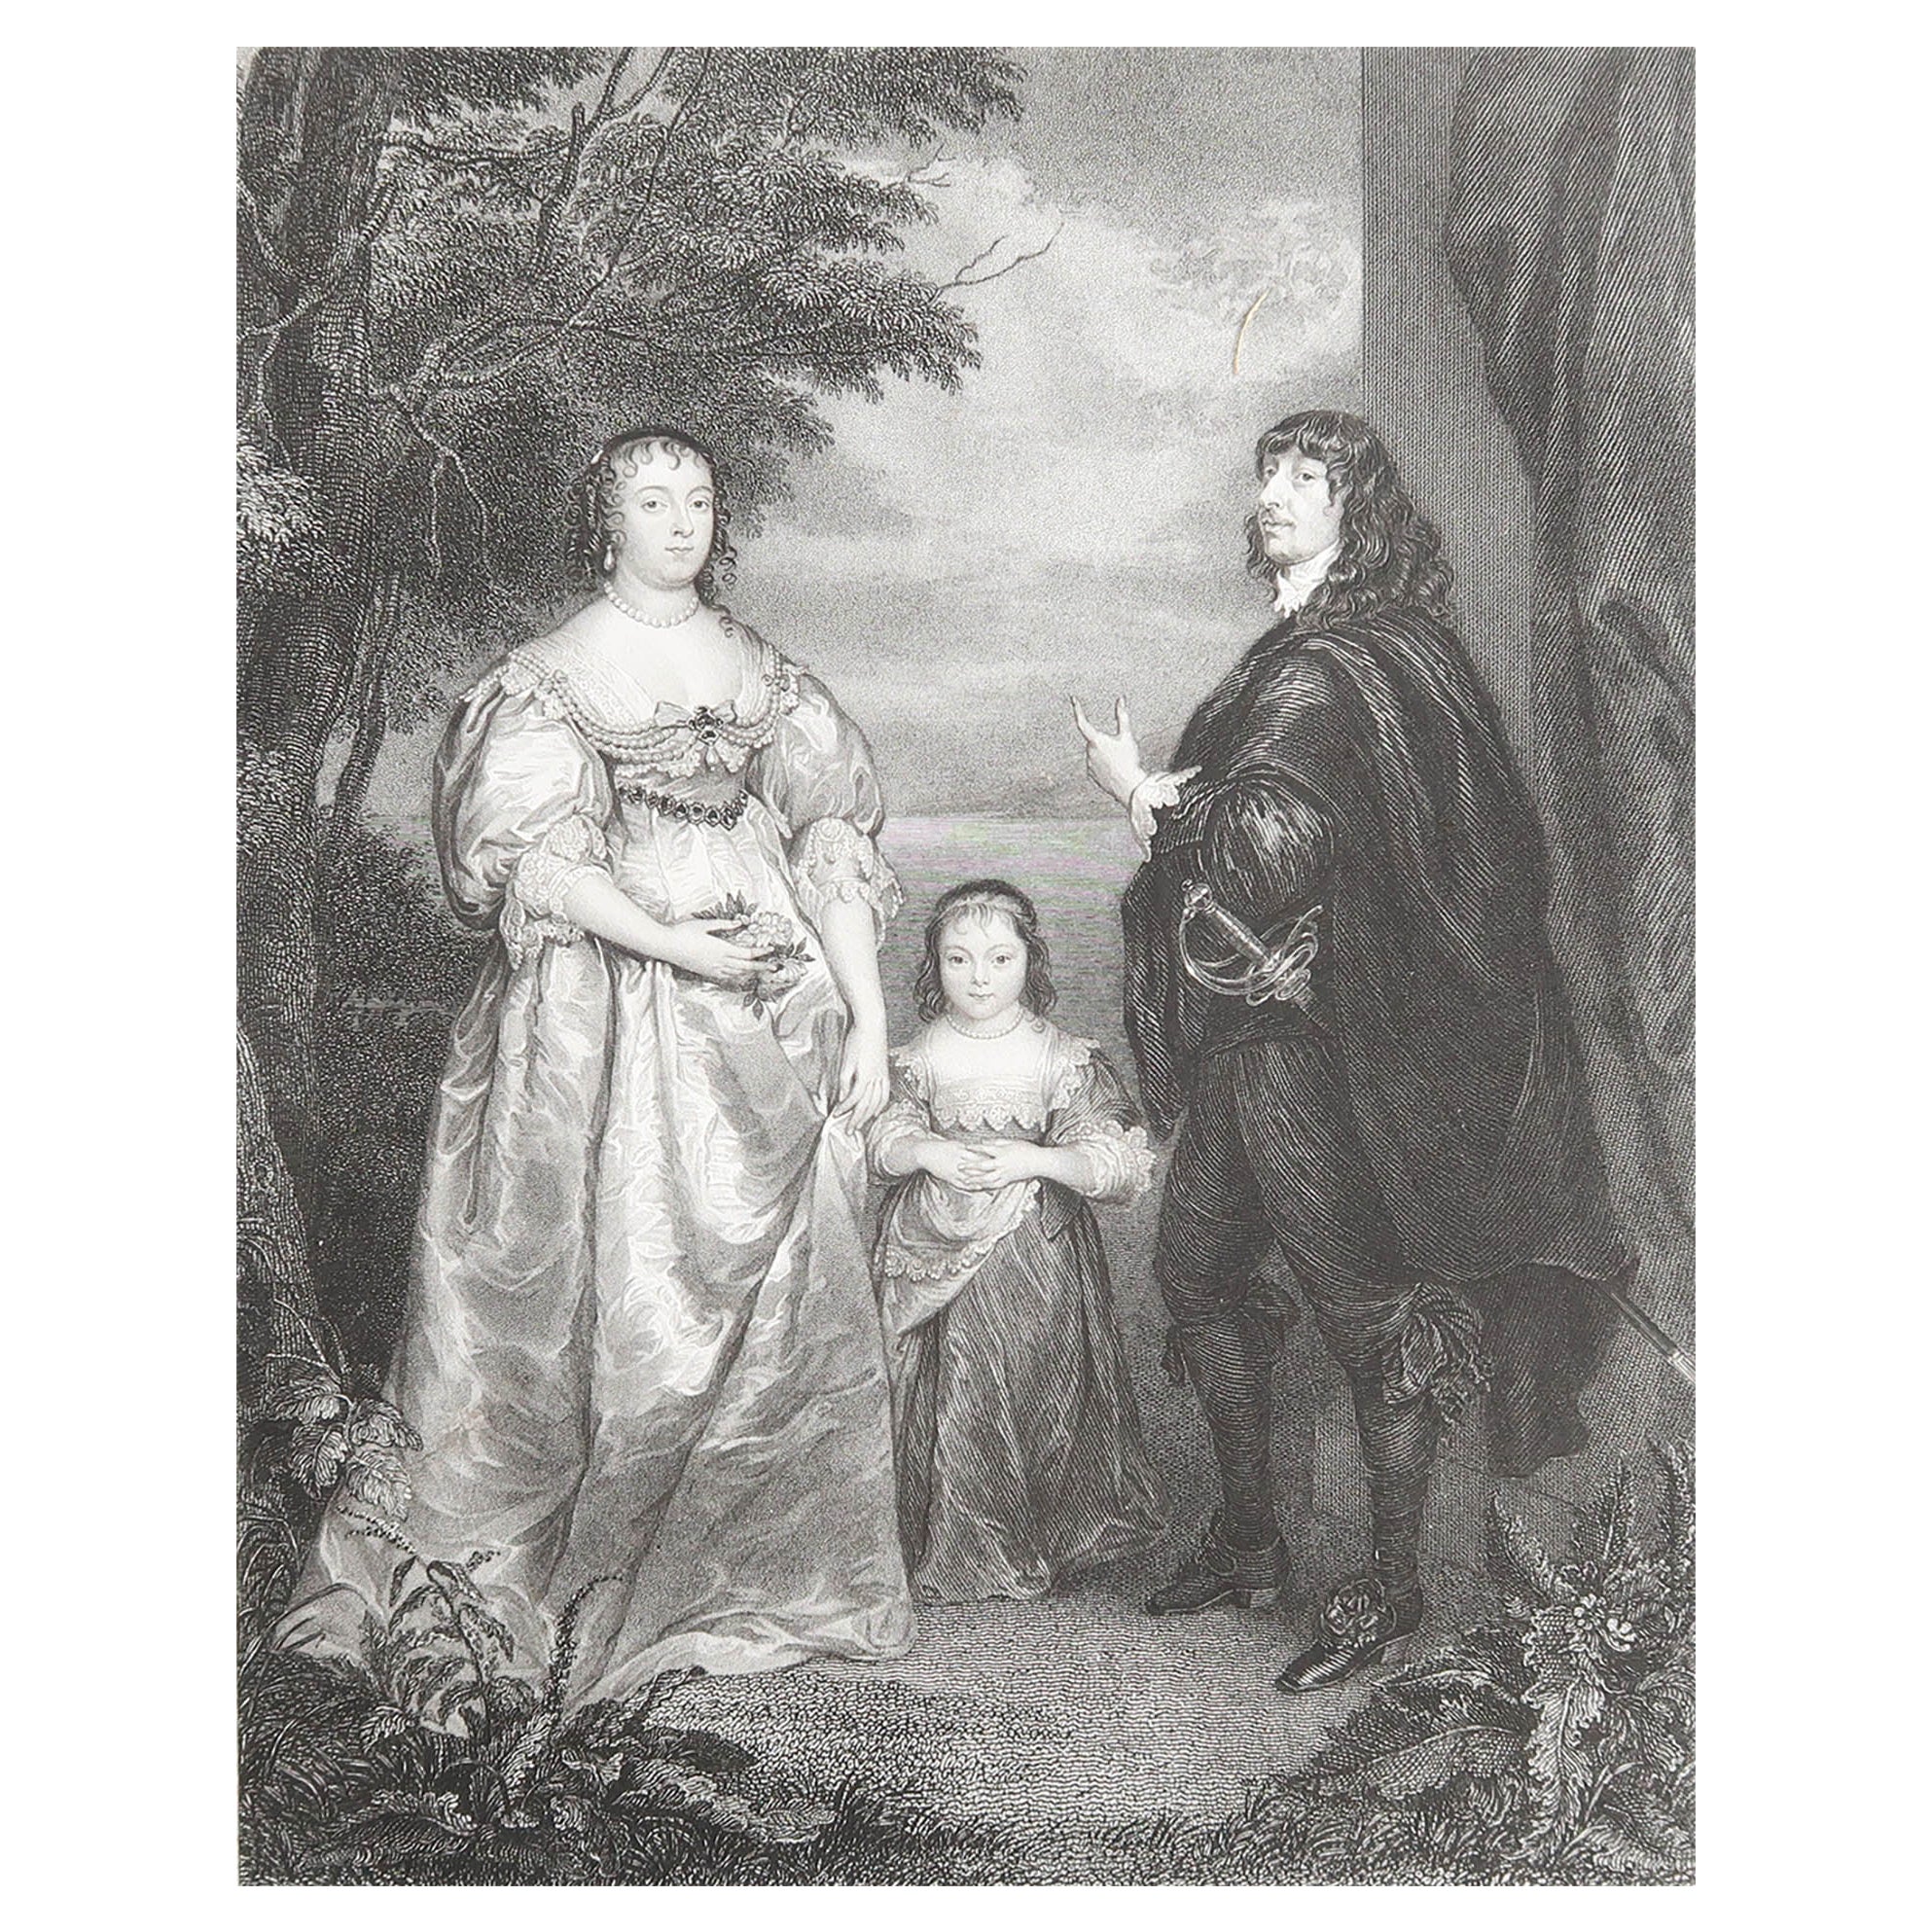 Original Antique Print of An Aristocratic Family After Van Dyck. Dated 1832